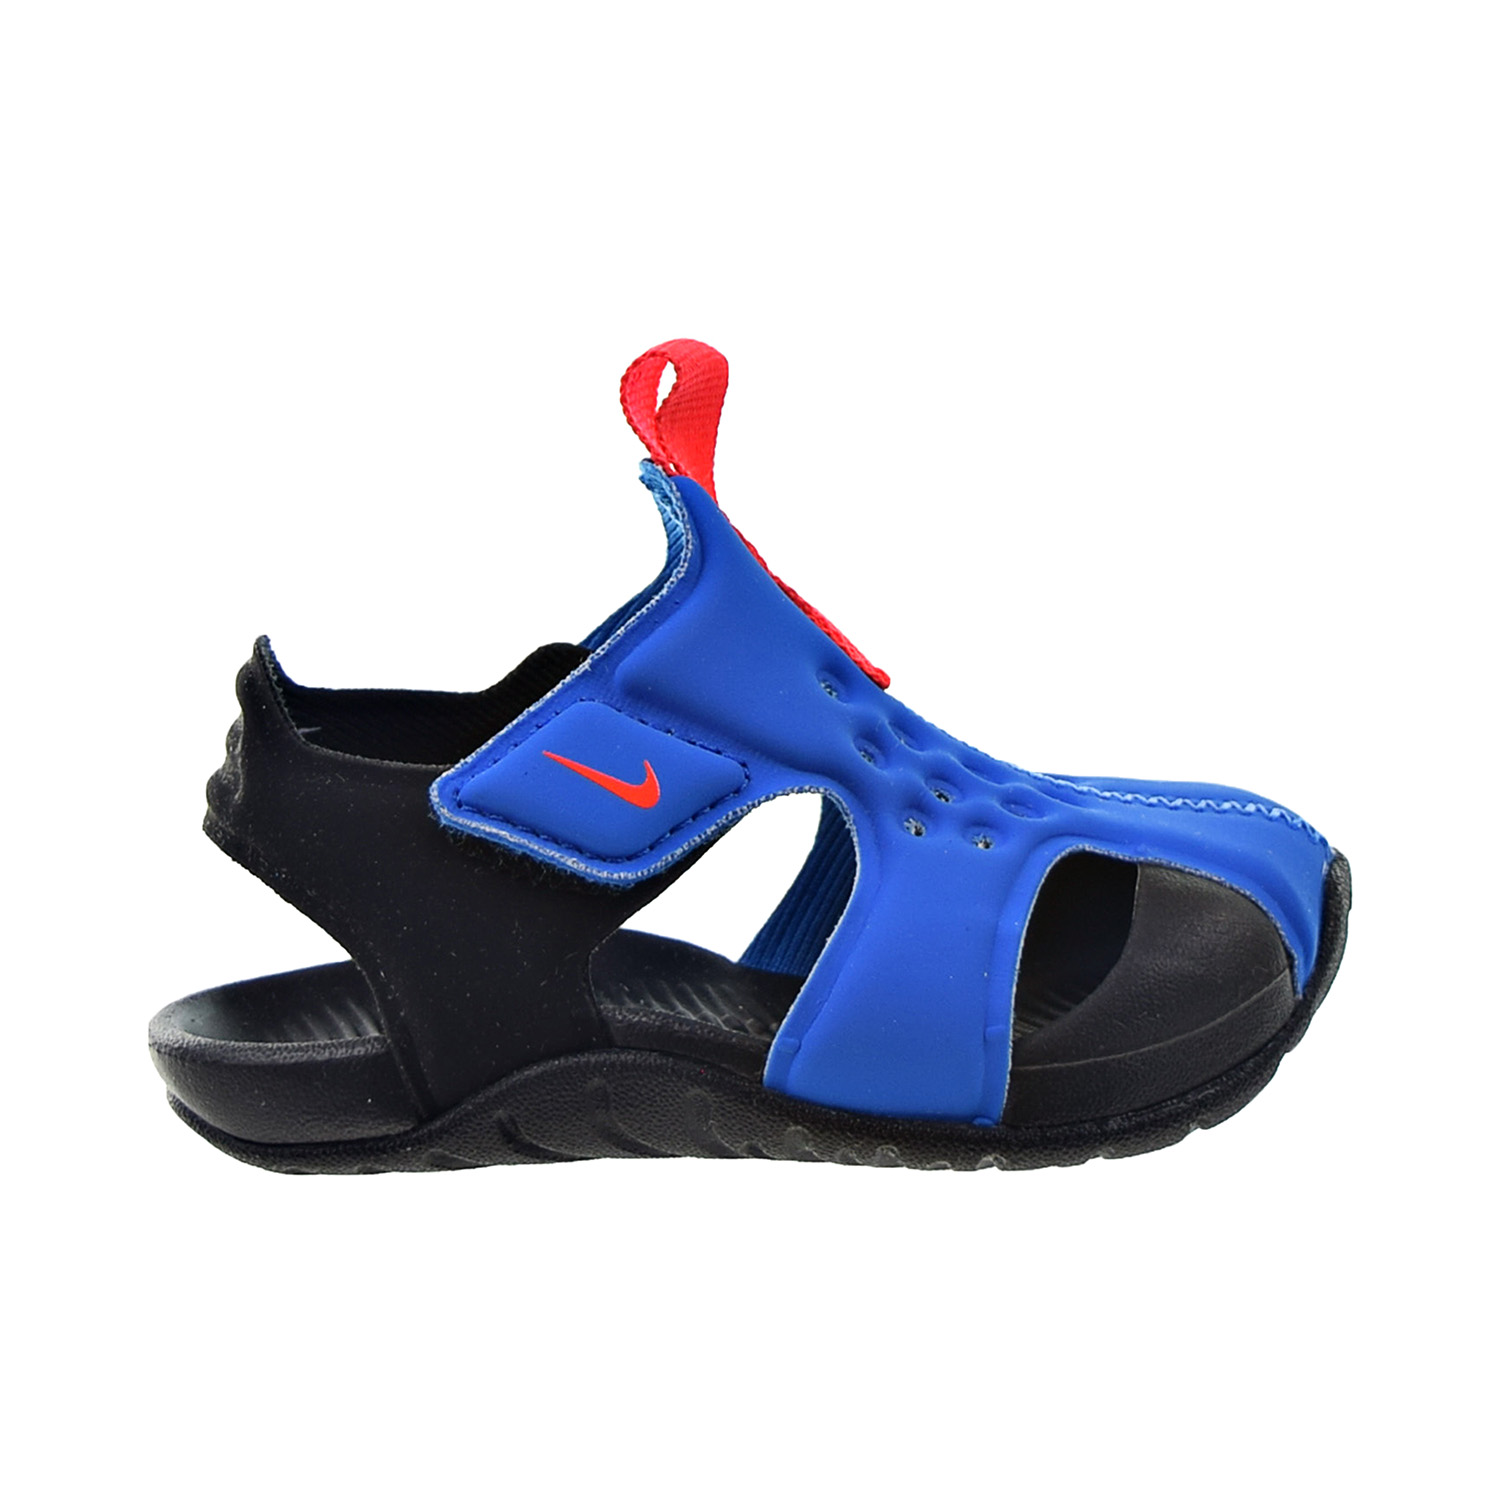 Nike Sunray Protect 2 (TD) Toddlers' Sandals Photo Blue-Bright Crimson 943827-400 - image 1 of 6